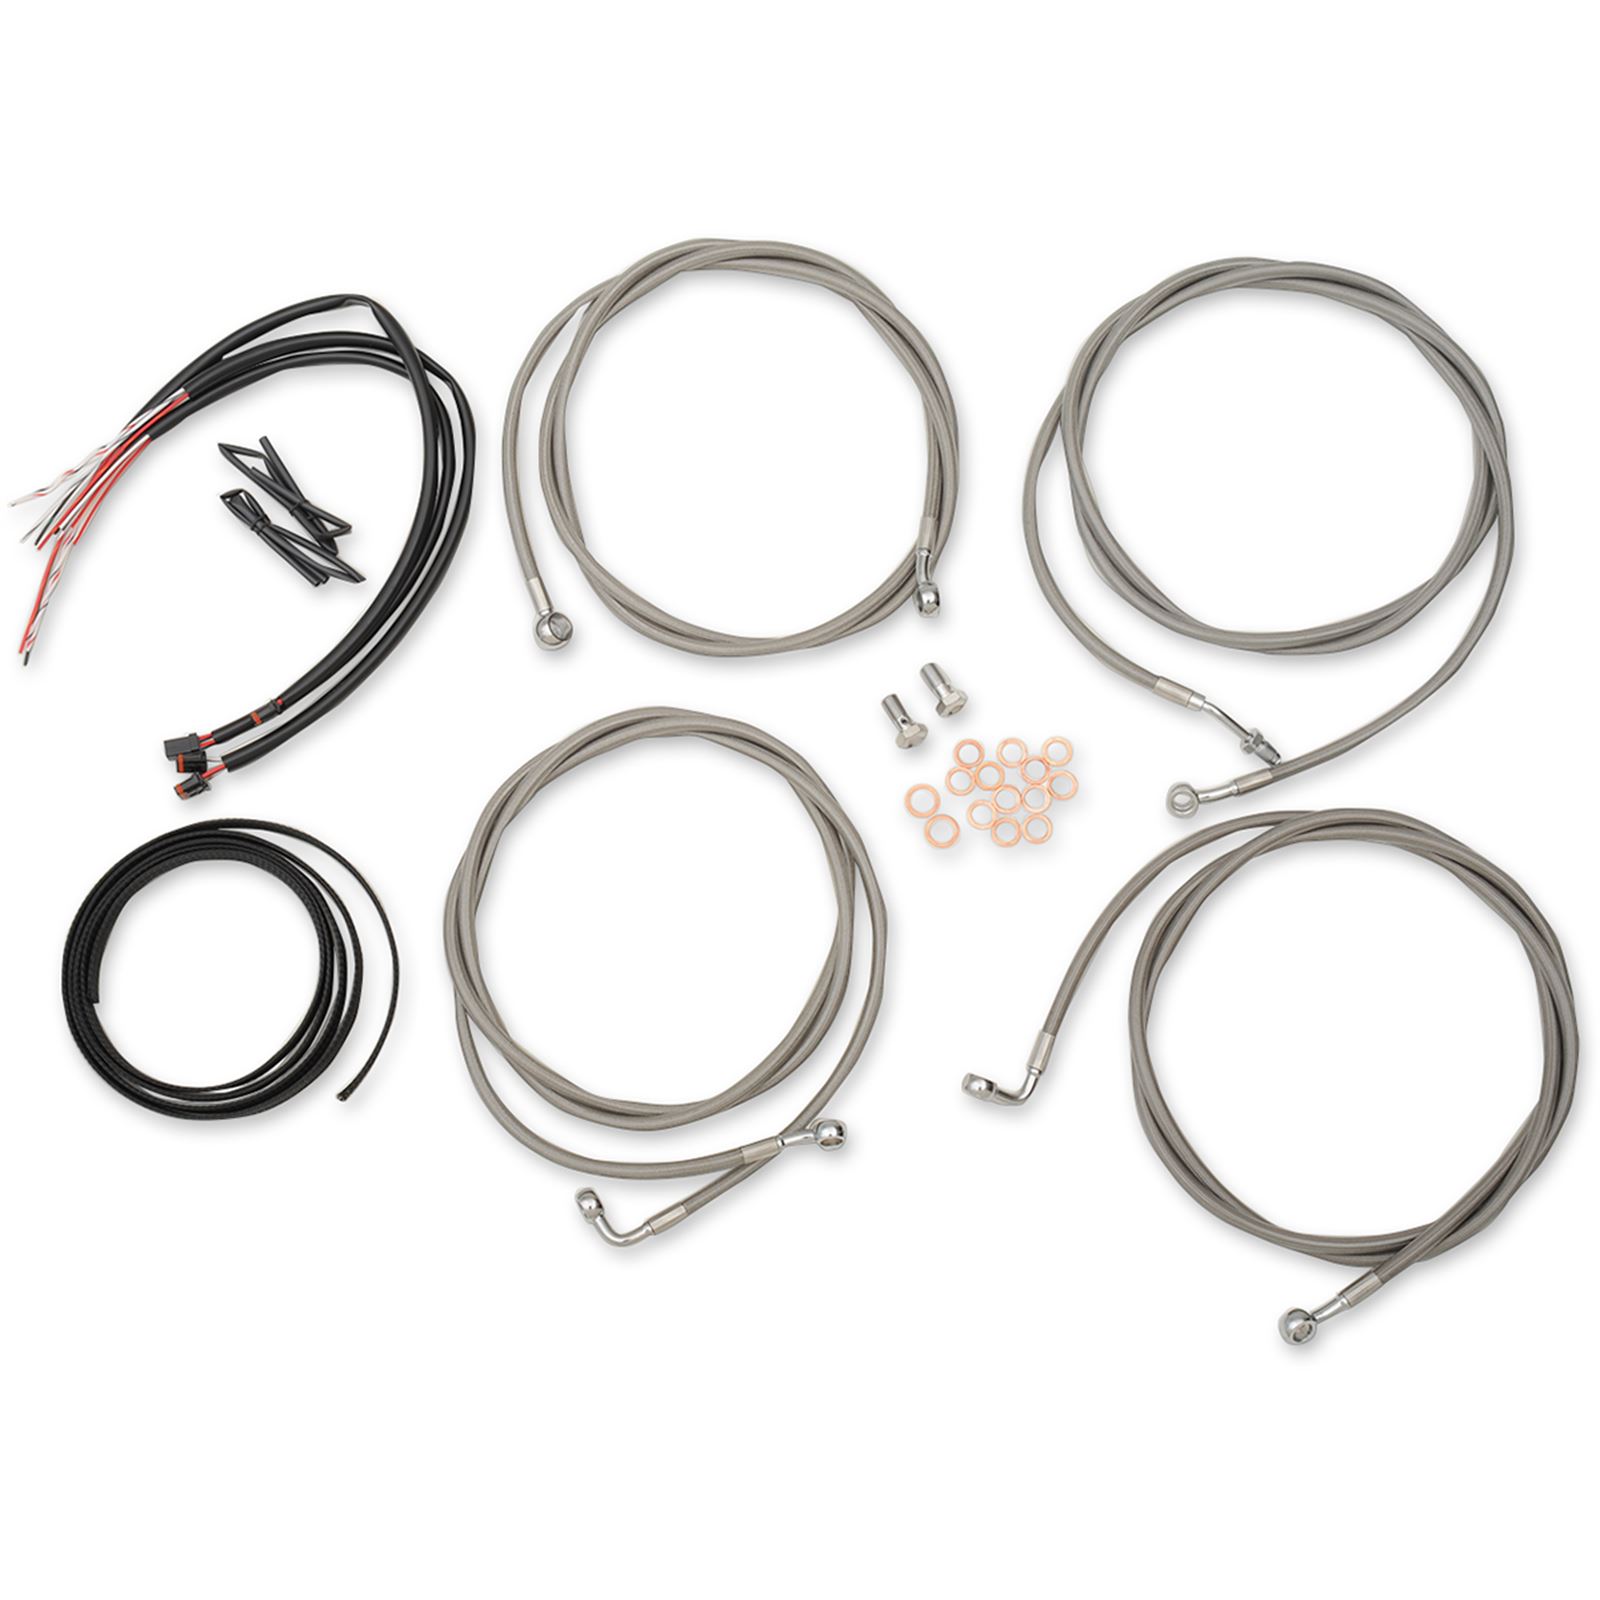 LA Choppers 15" - 17" Cable Kit for '17 - '19 FL